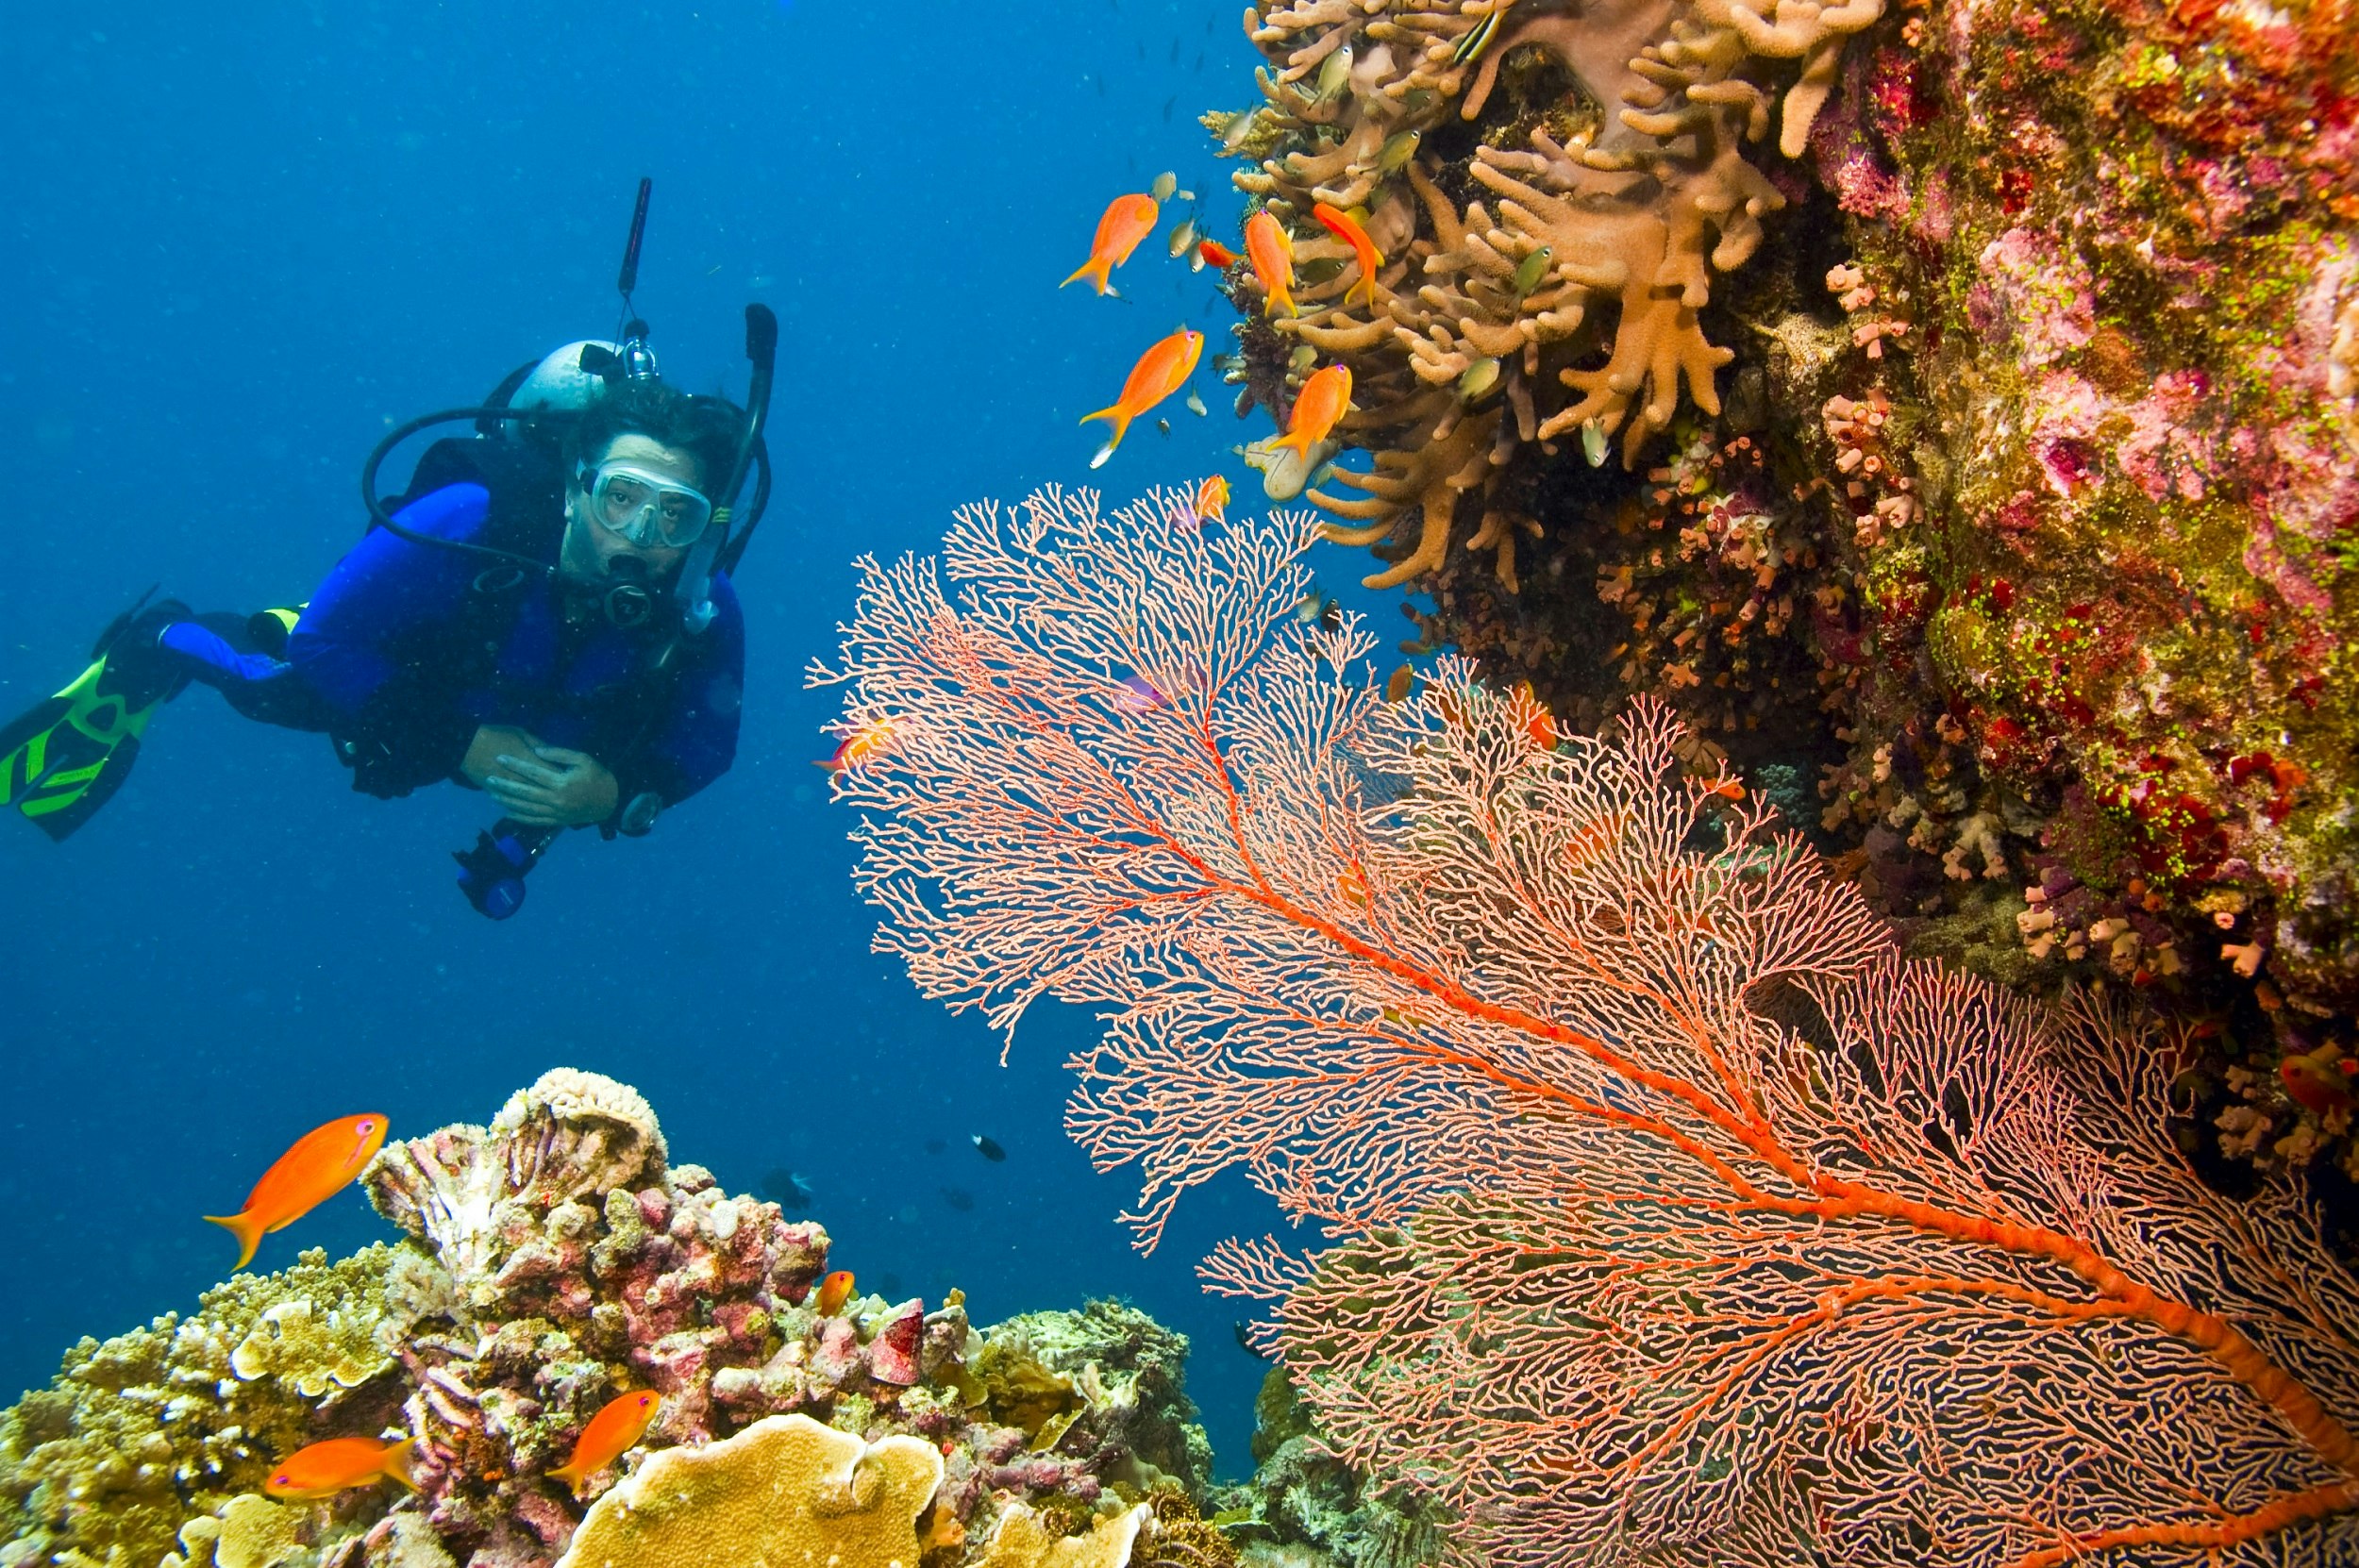 A diver admires orange sea fan coral on the Great Barrier Reef